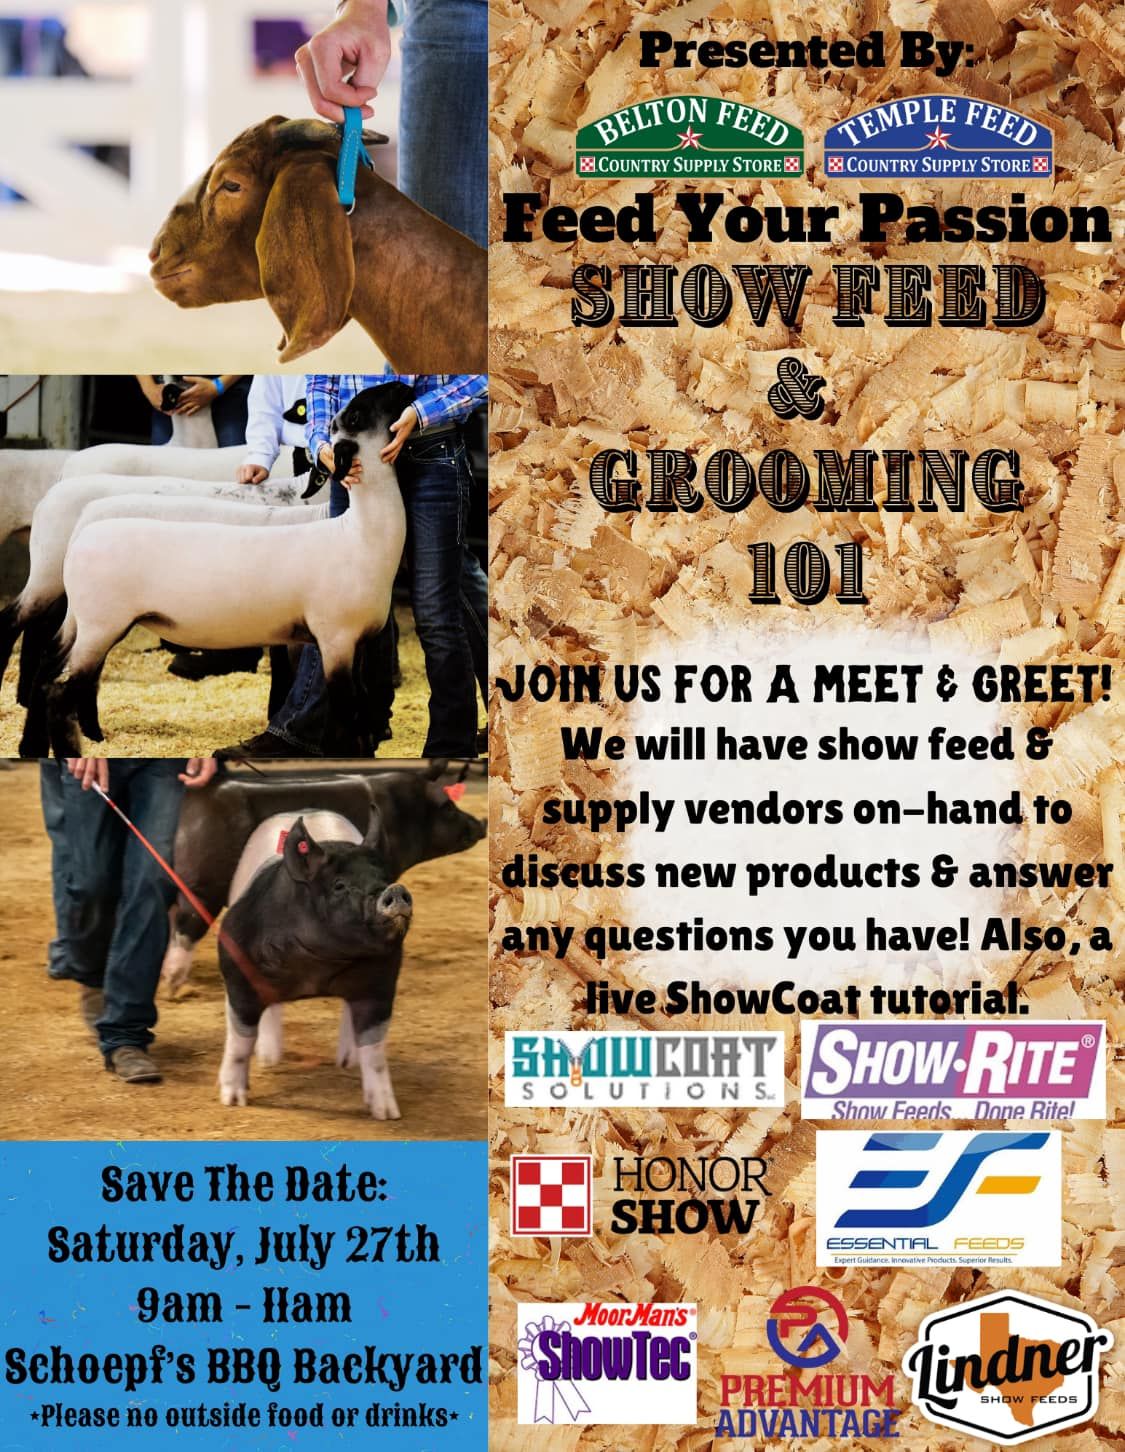 Feed Your Passion - Show Feed & Grooming 101 